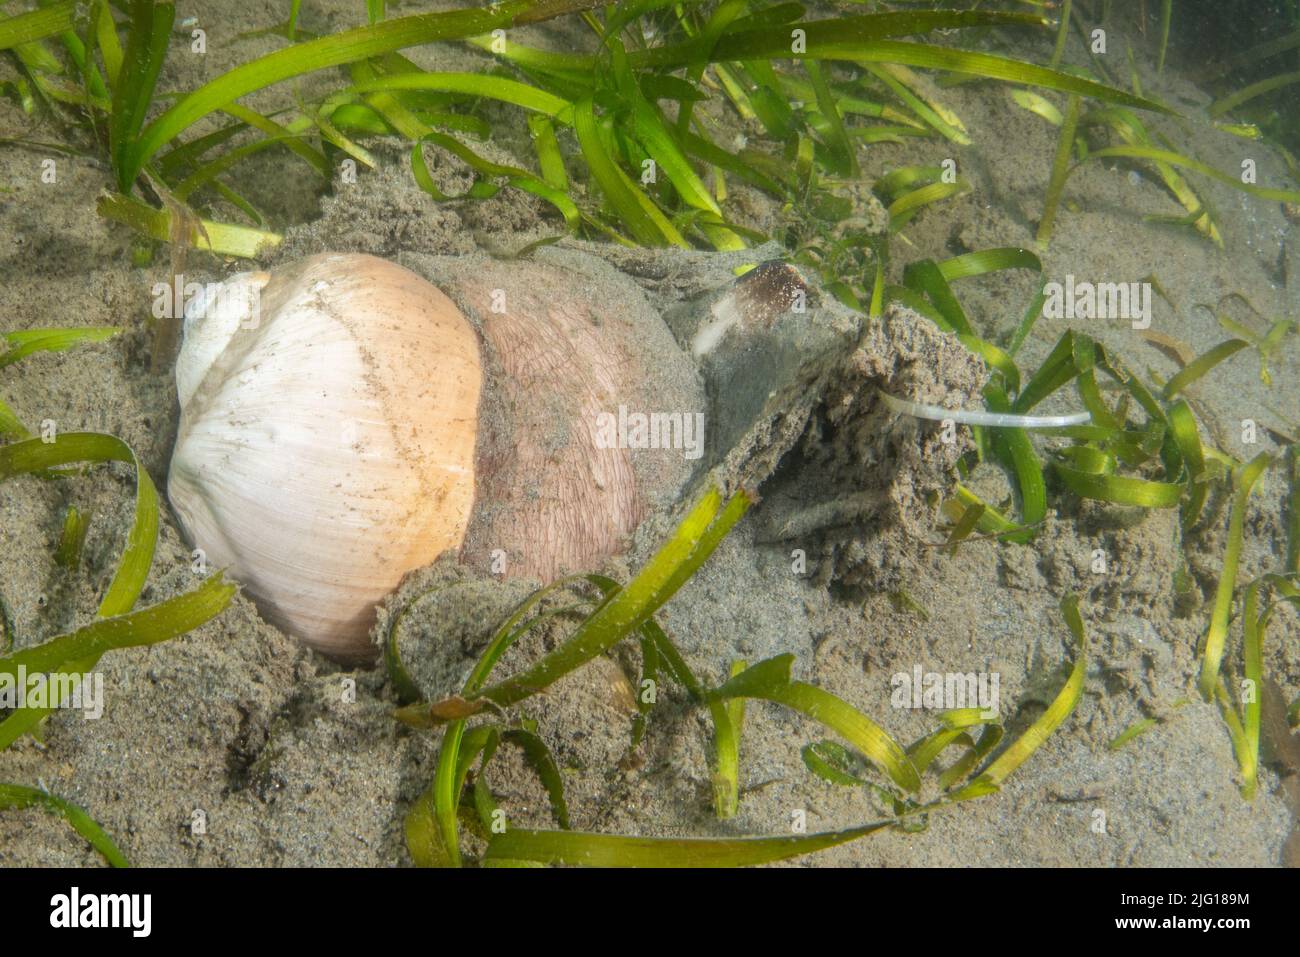 Lewis's moon snail (Neverita lewisii) makes its way past seagrass on the ocean floor in the Greater Farallones National marine sanctuary in California Stock Photo